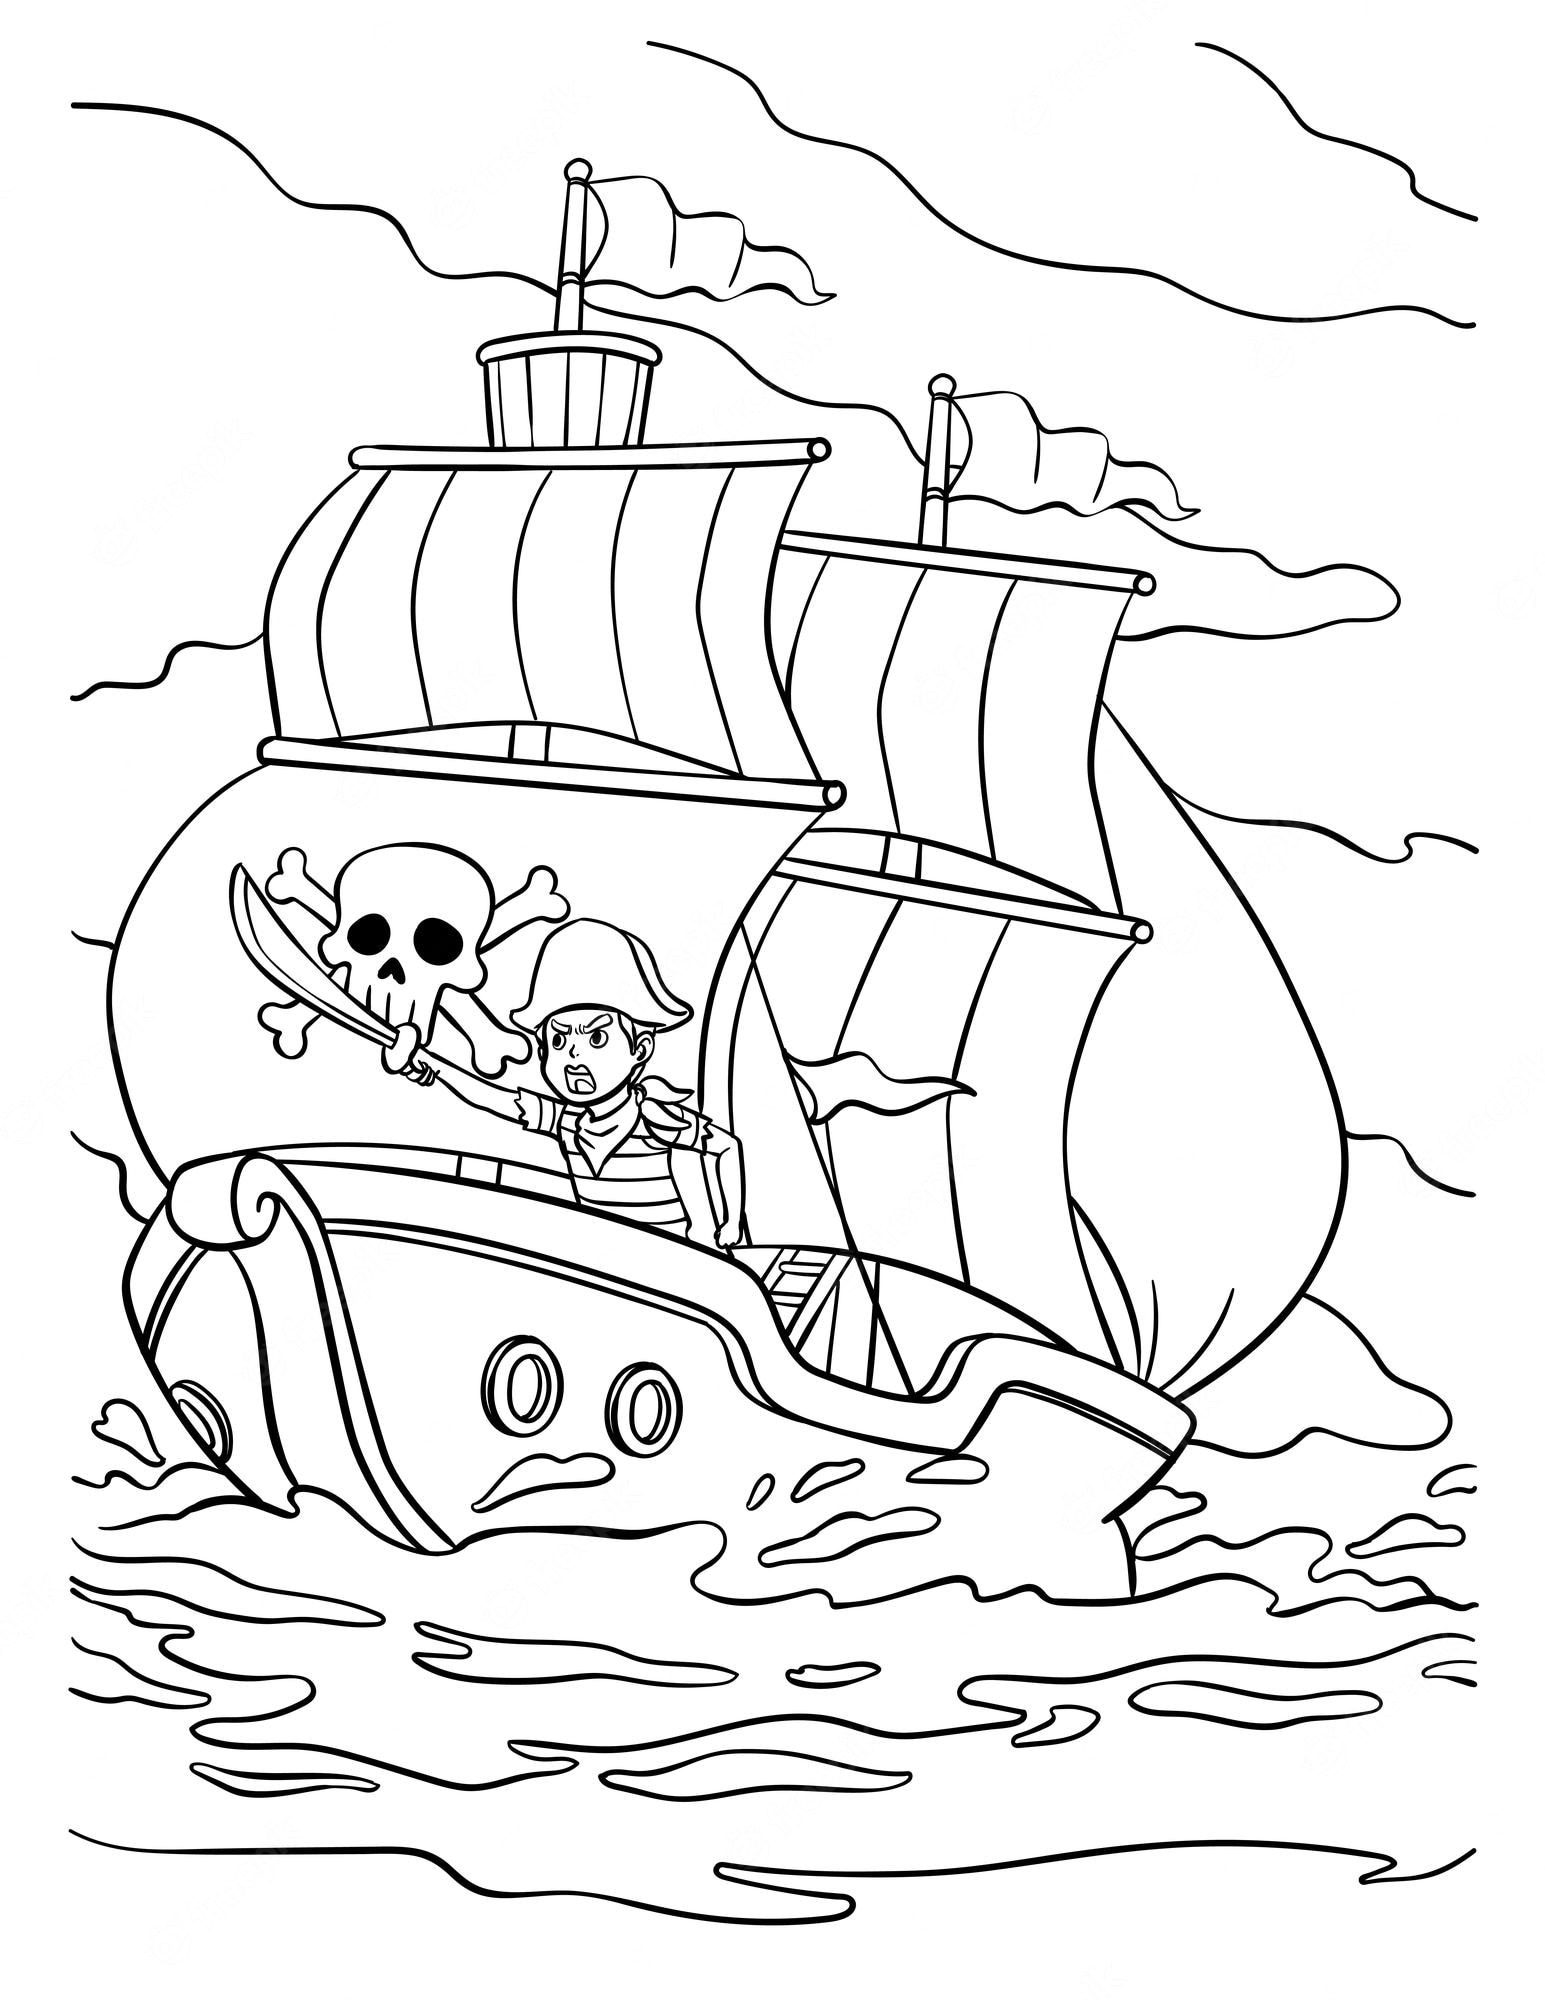 Premium Vector | Pirate ship coloring page for kids